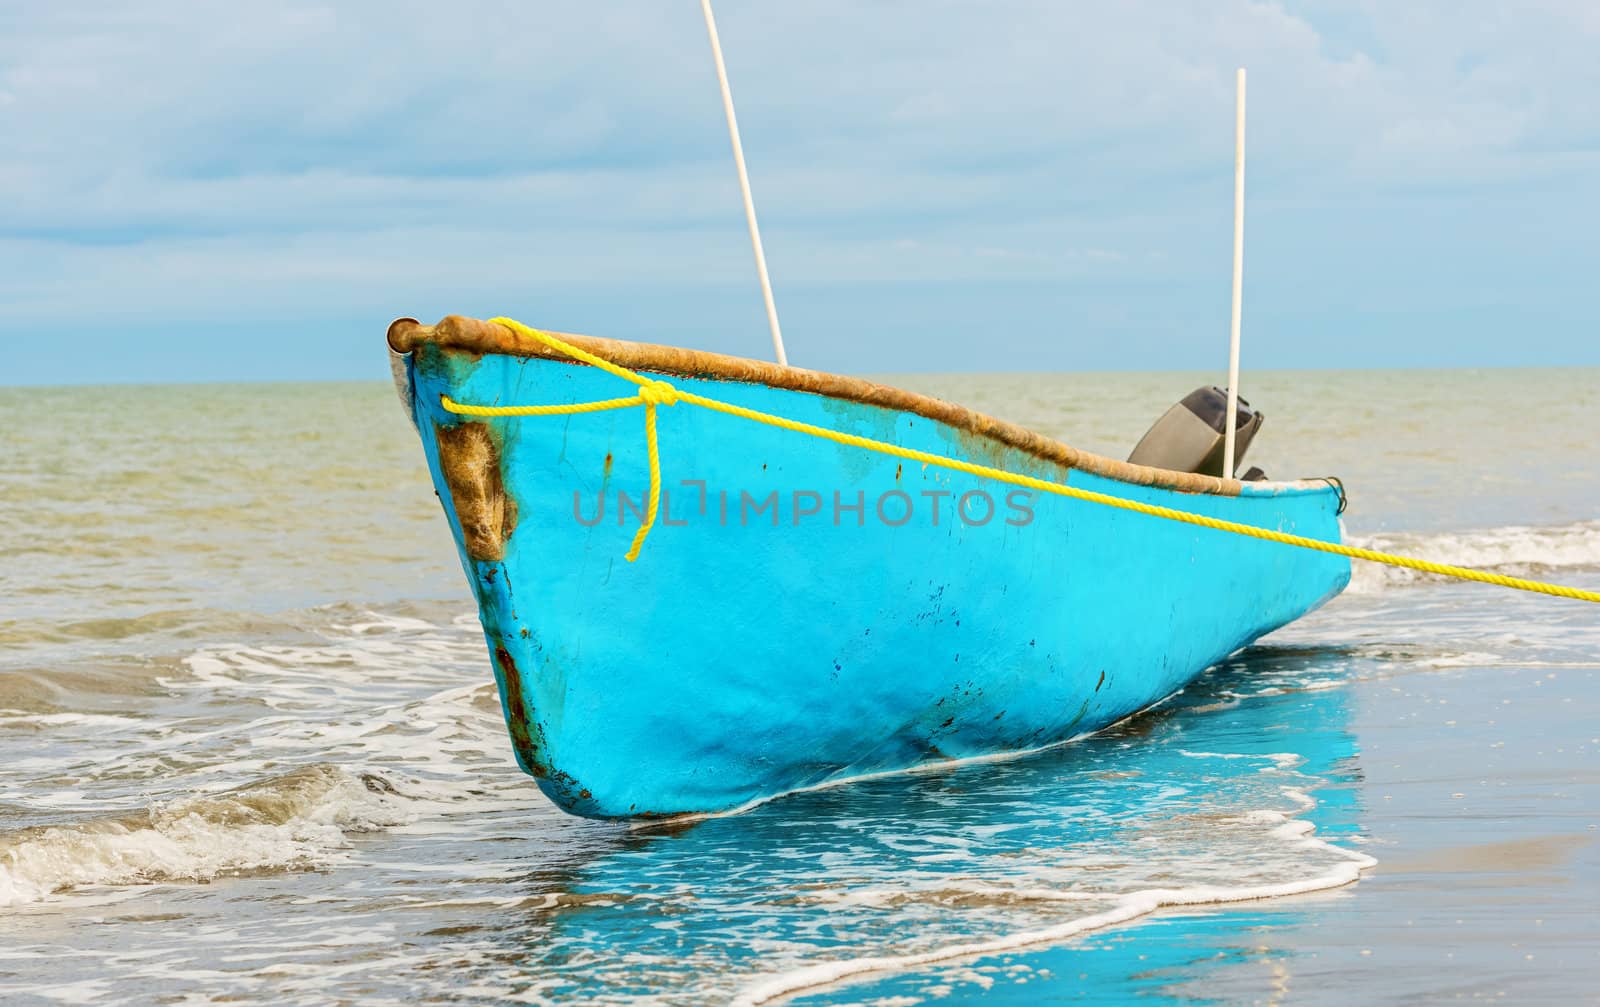 Boat on the shore in El Rompio Panama by Marcus